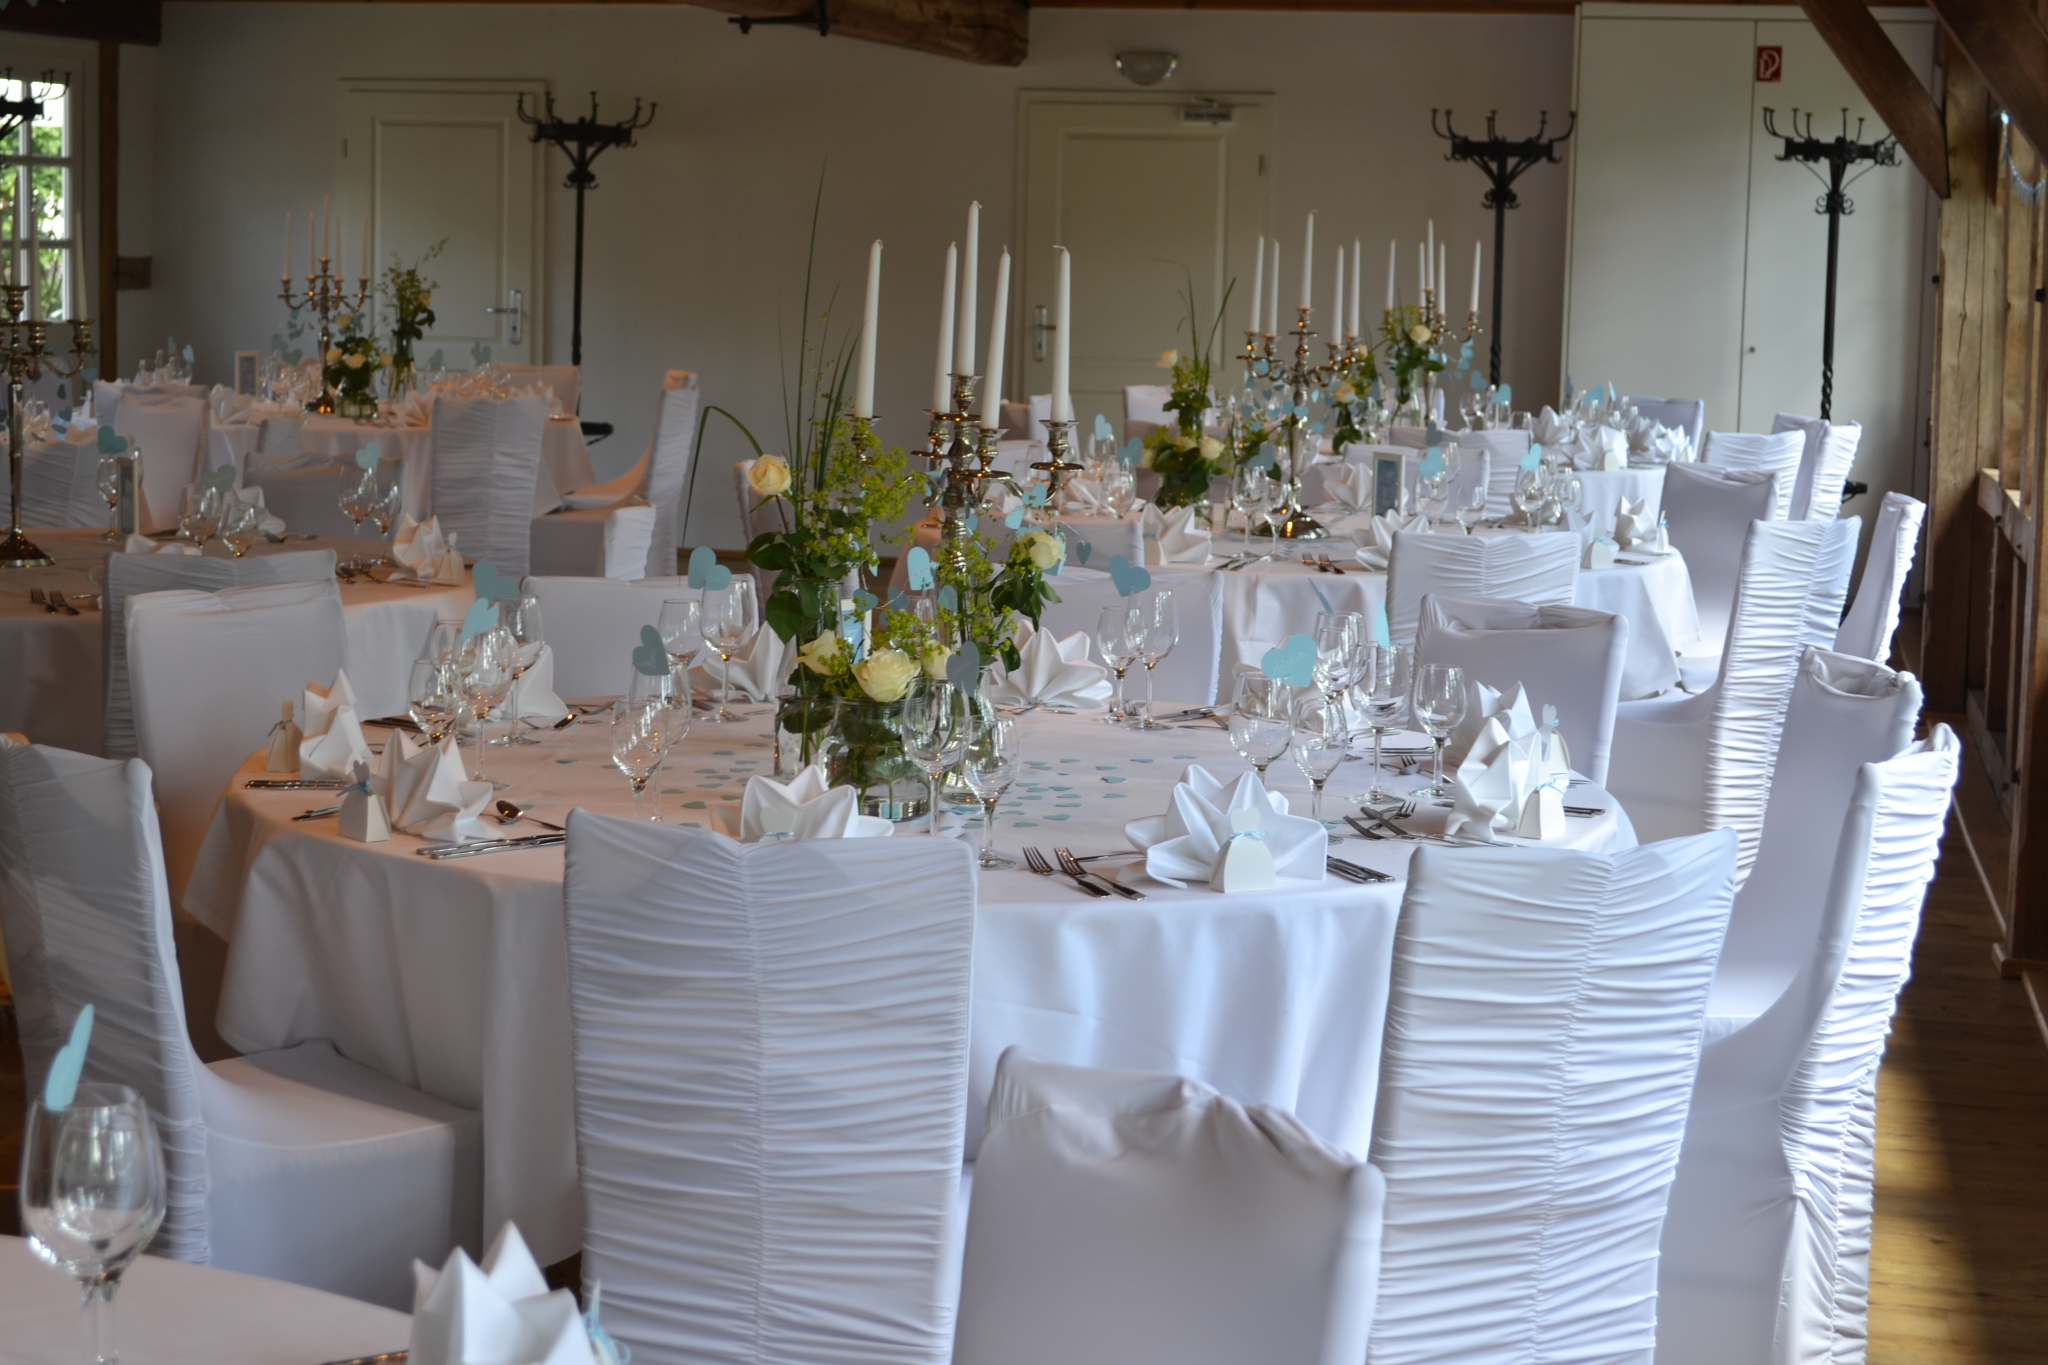 Table decoration for a wedding celebration in white, cream and light blue | Landhaus Haverbeckhof wedding location